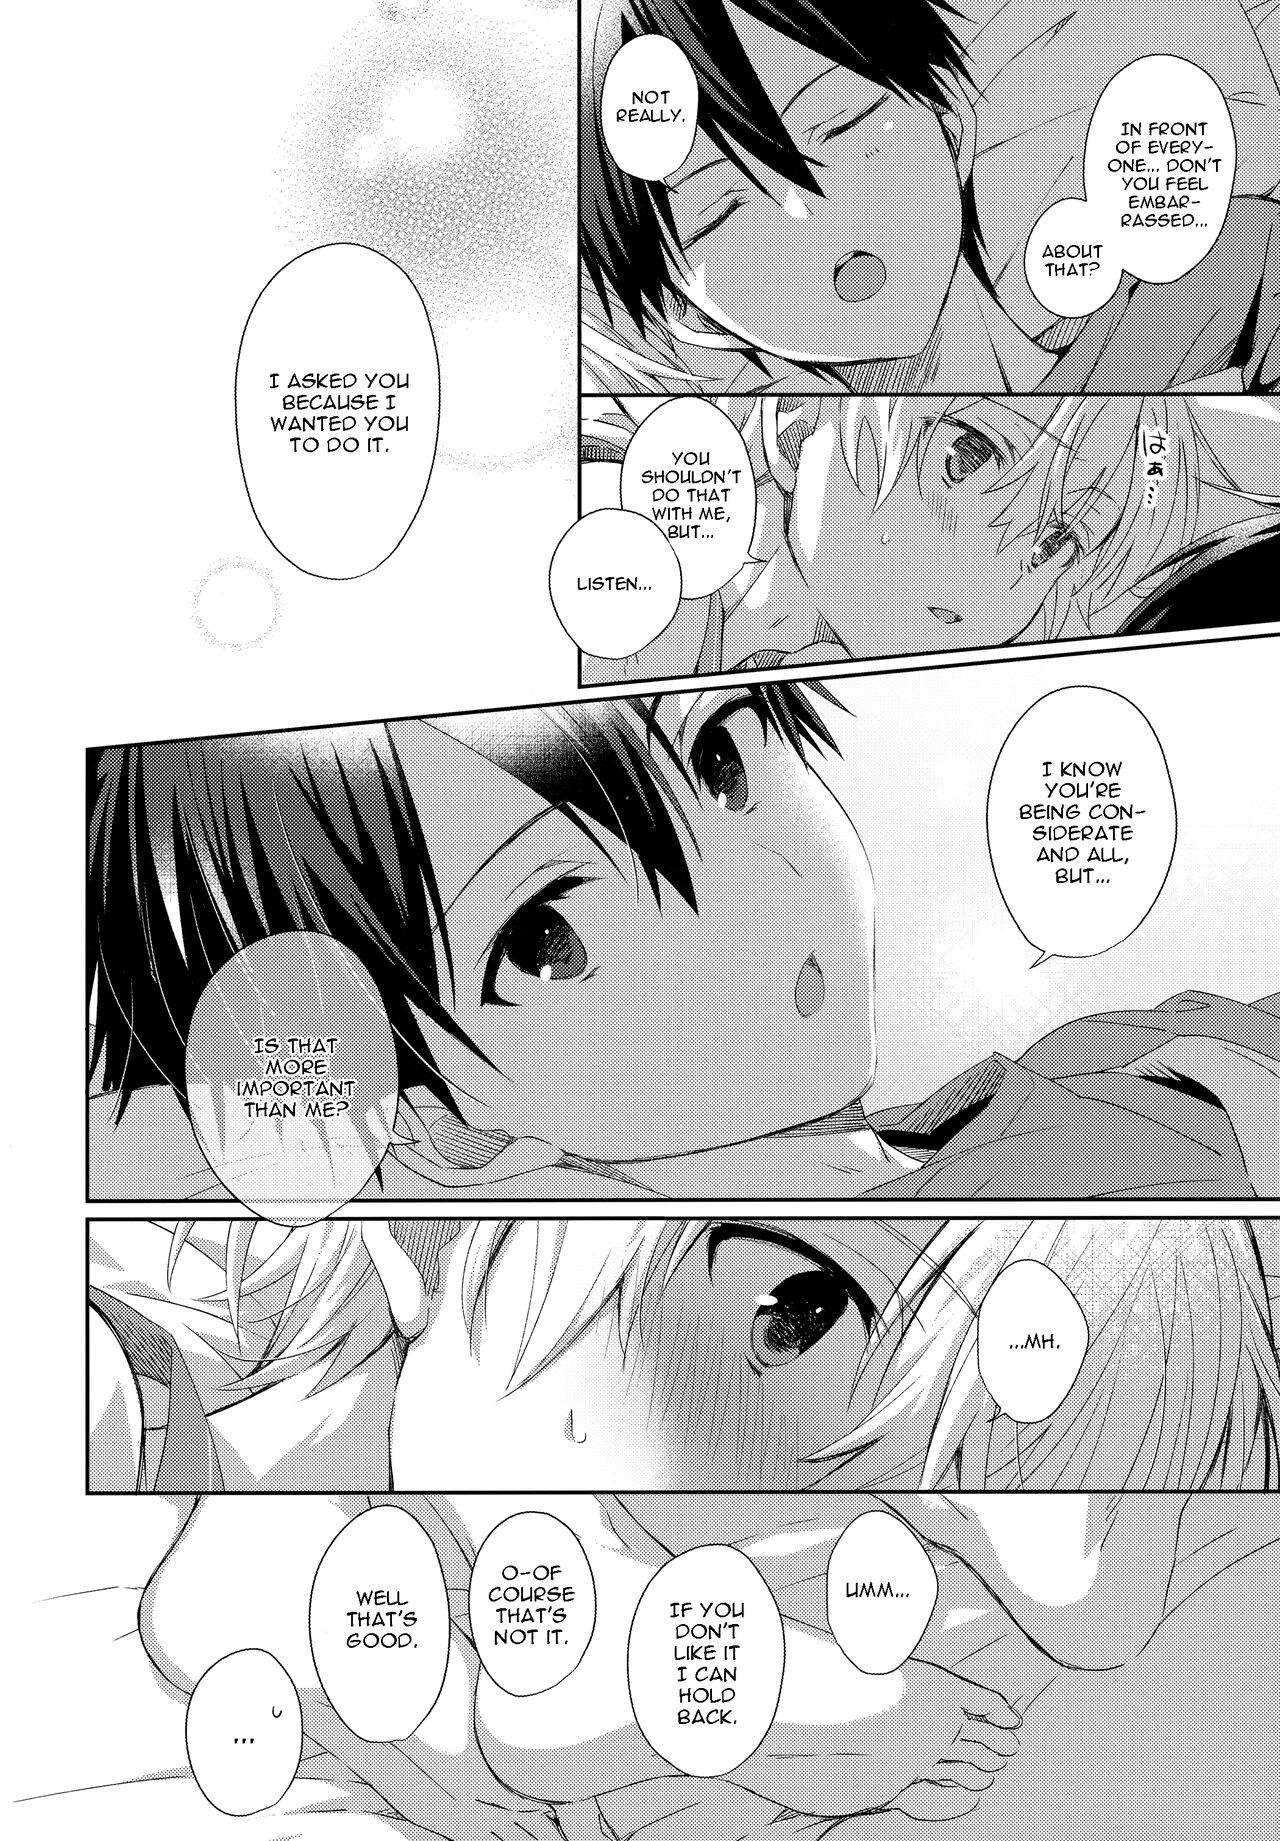 Interview Match made in heaven - Sword art online Group Sex - Page 3